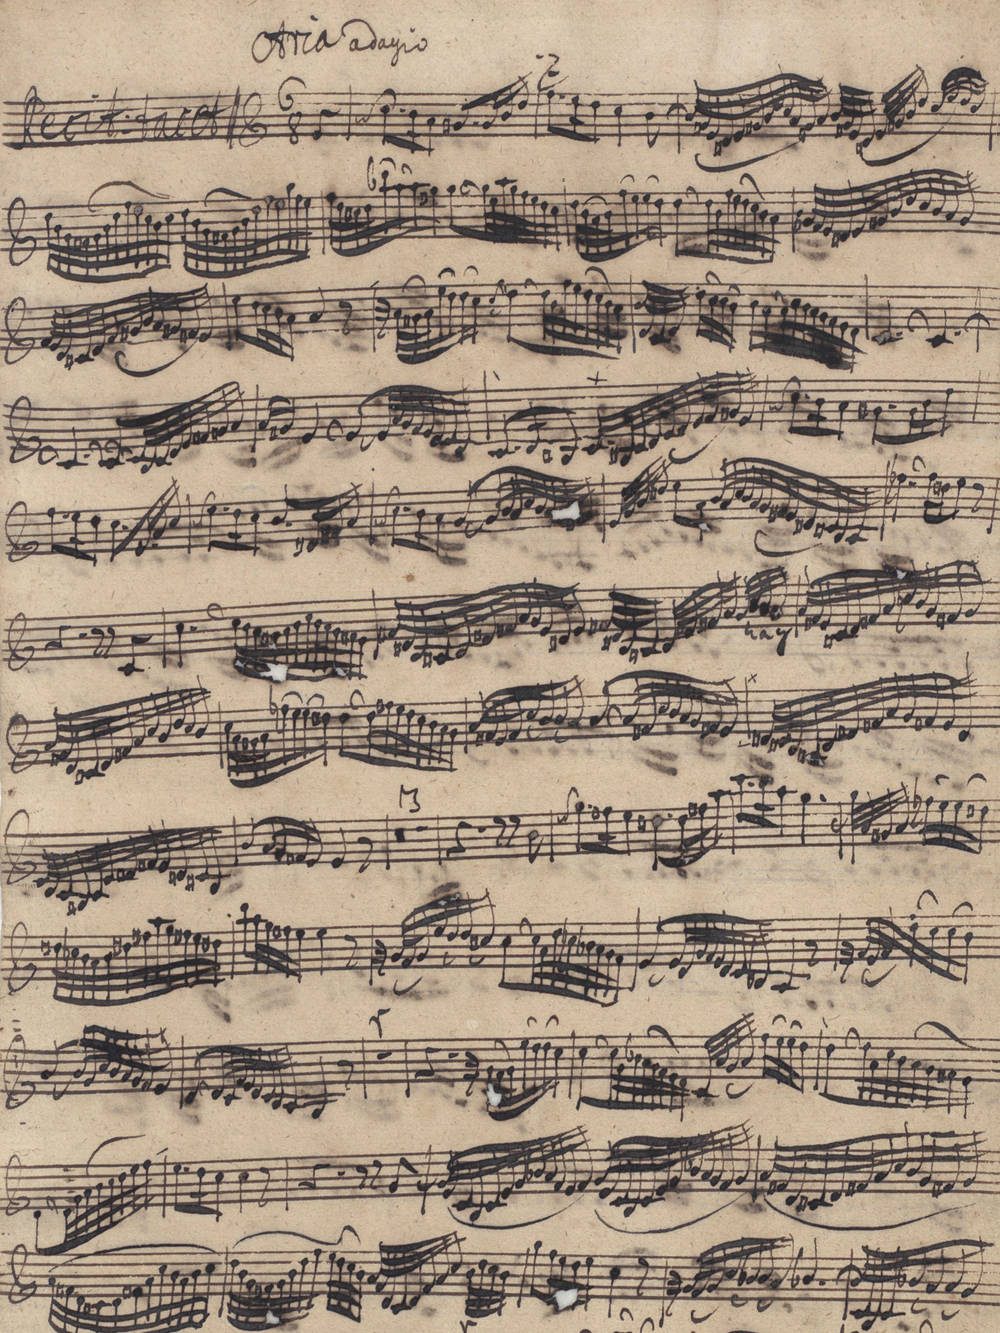 Autograph manuscript of the obbligato piccolo violino part of the first soprano-bass aria, one of the few surviving instrumental parts written by Bach, from the archives of the Thomaskirche